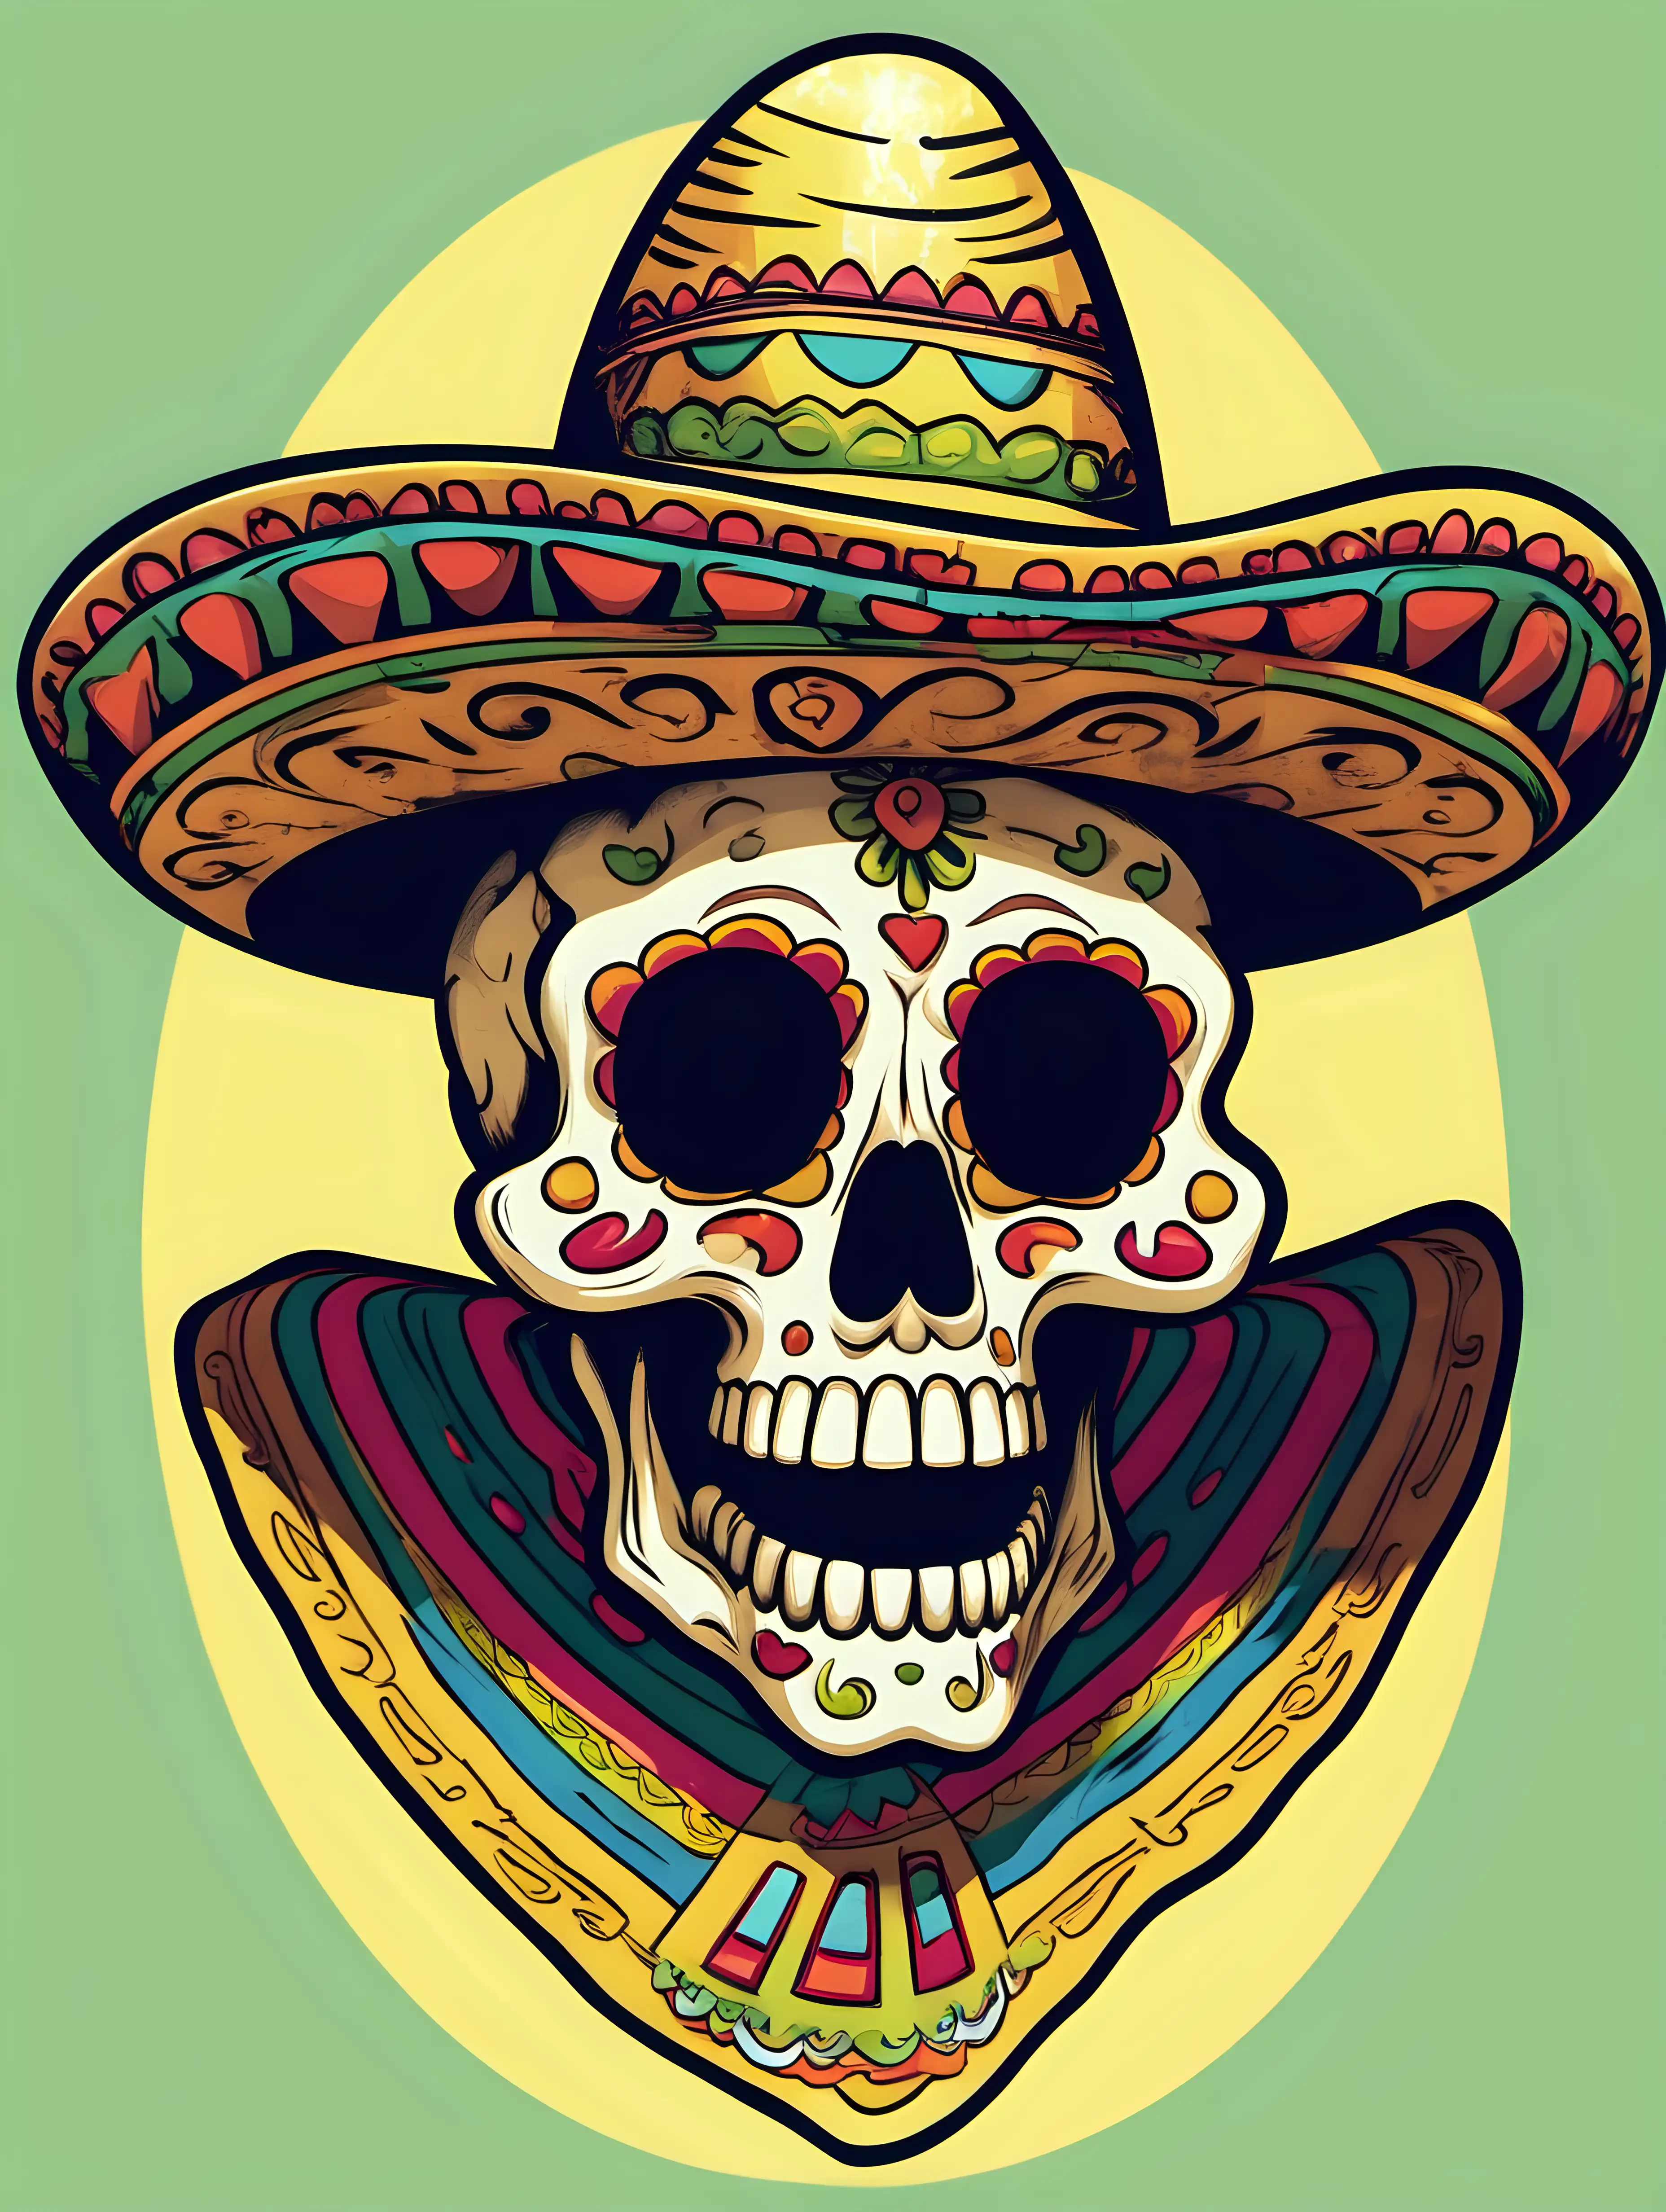 Festive Skull in Colorful May 5th Style Sombrero